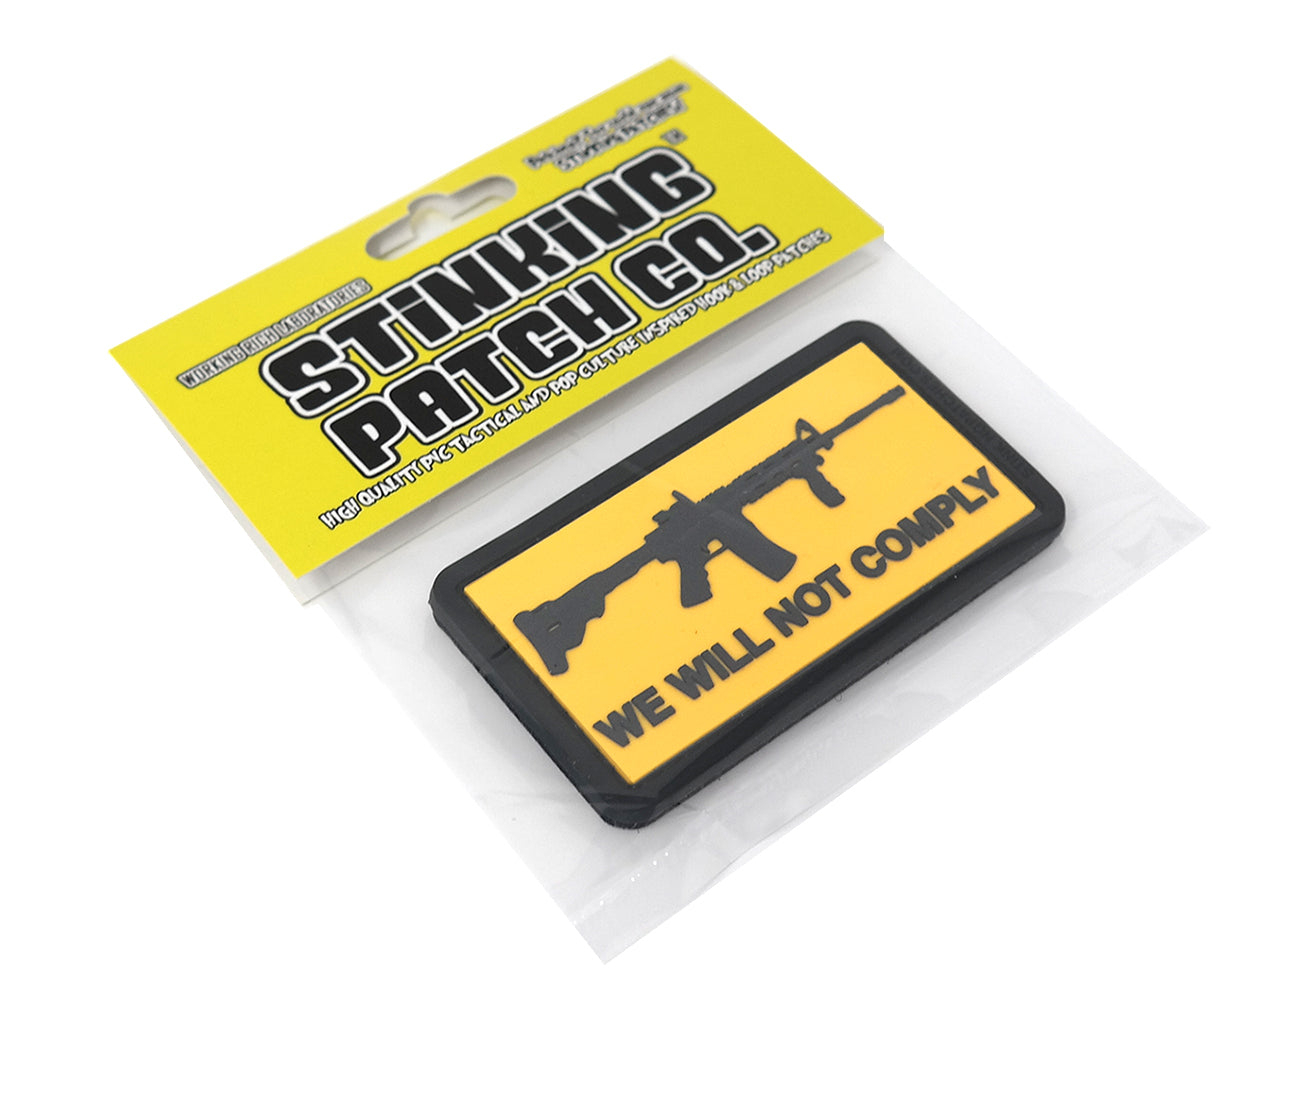 PVC Morale Patch - 2x3 Warning Magnet